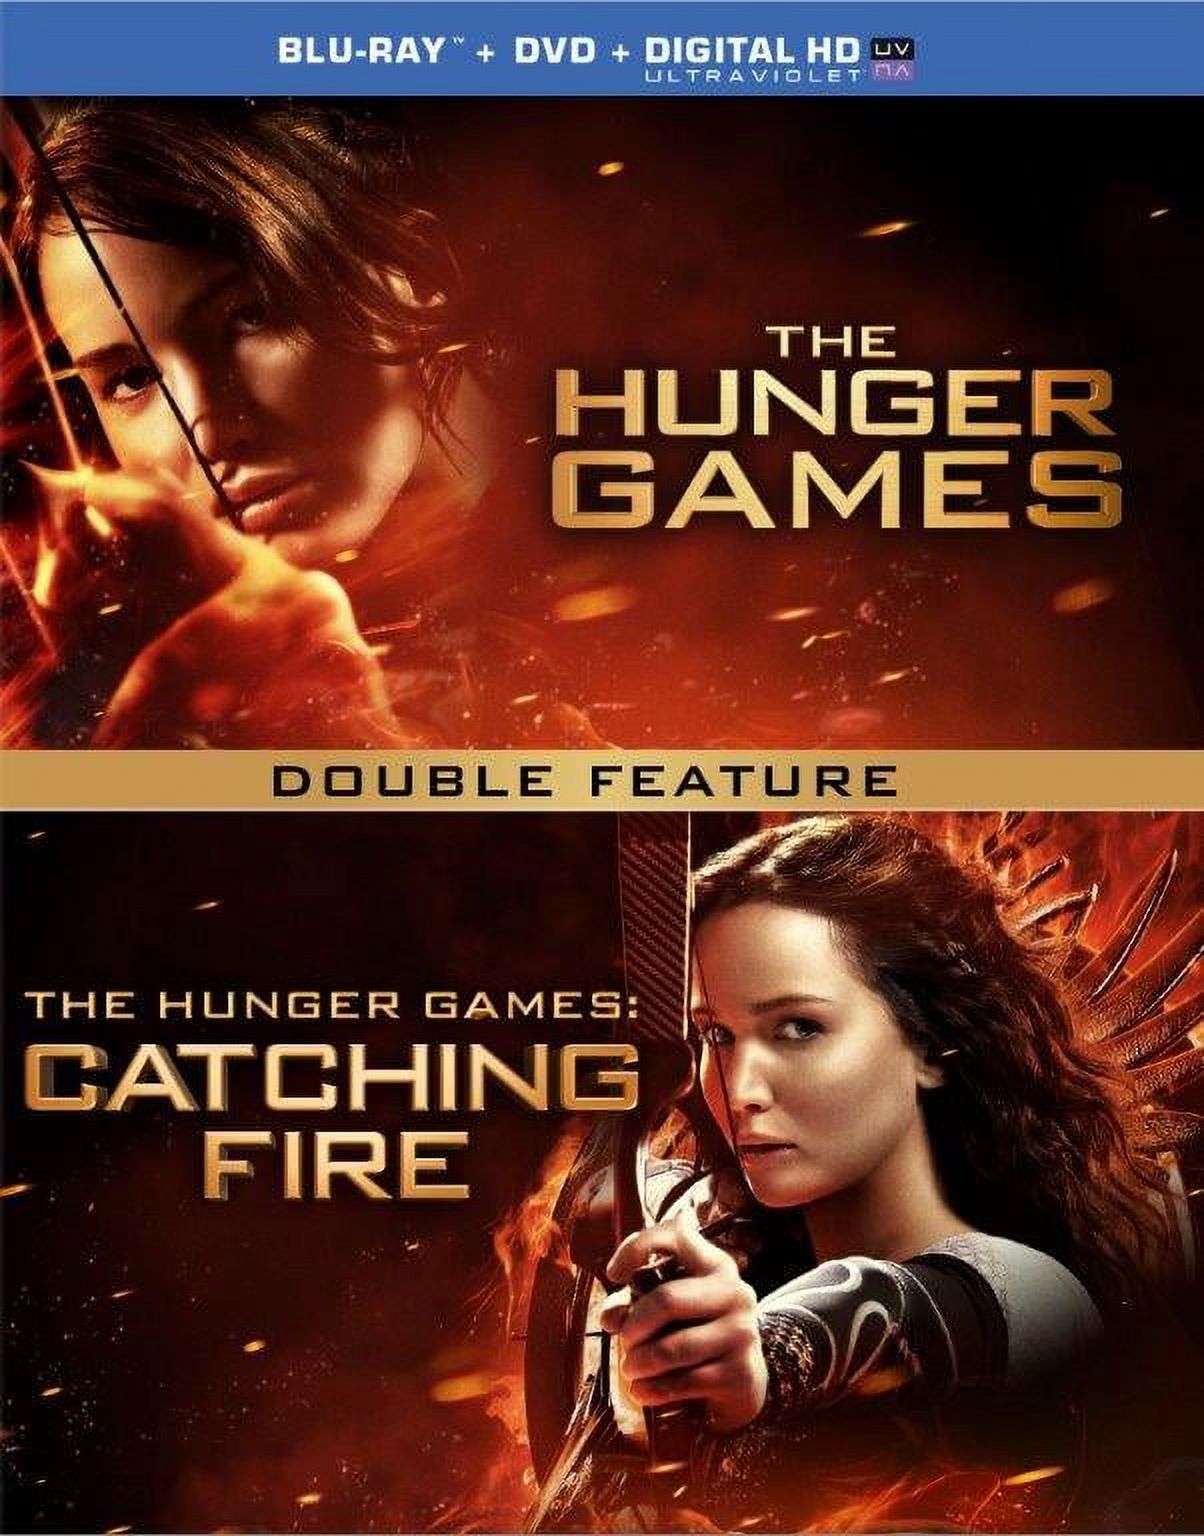 The Hunger Games: Catching Fire / The Hunger Games (Walmart Exclusive) (Blu-ray) - image 2 of 2